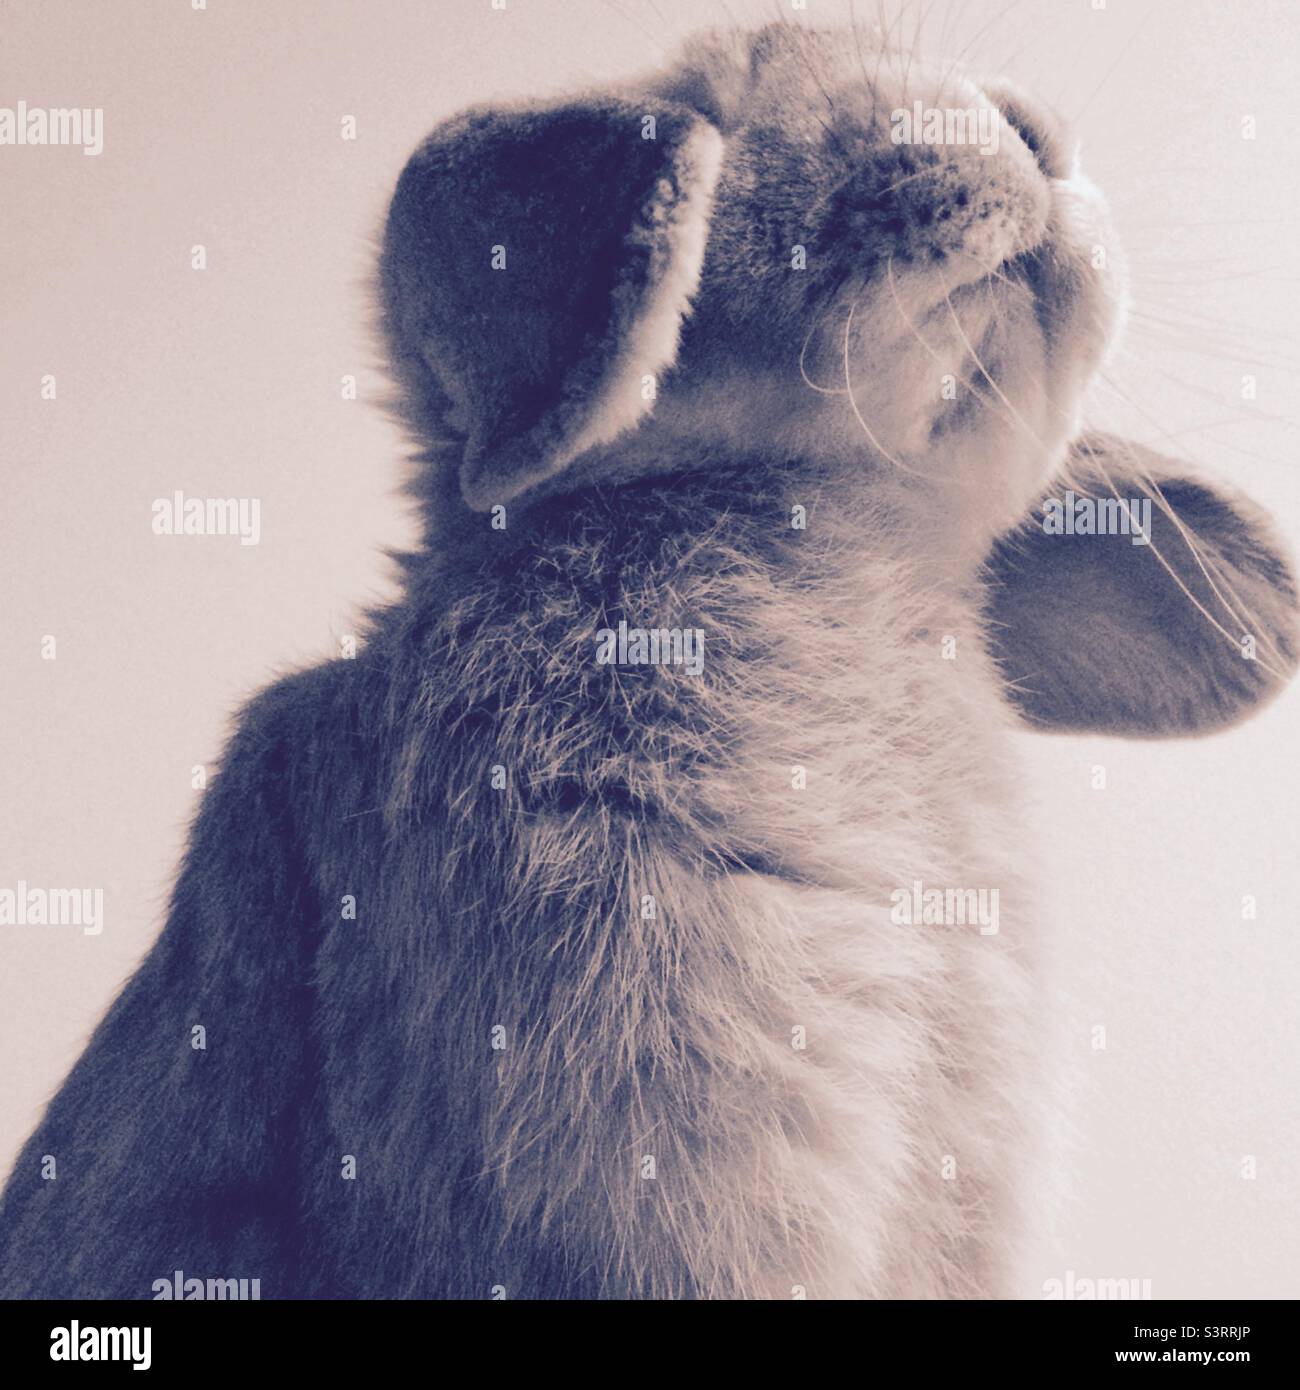 Lop eared rabbit in black and white Stock Photo